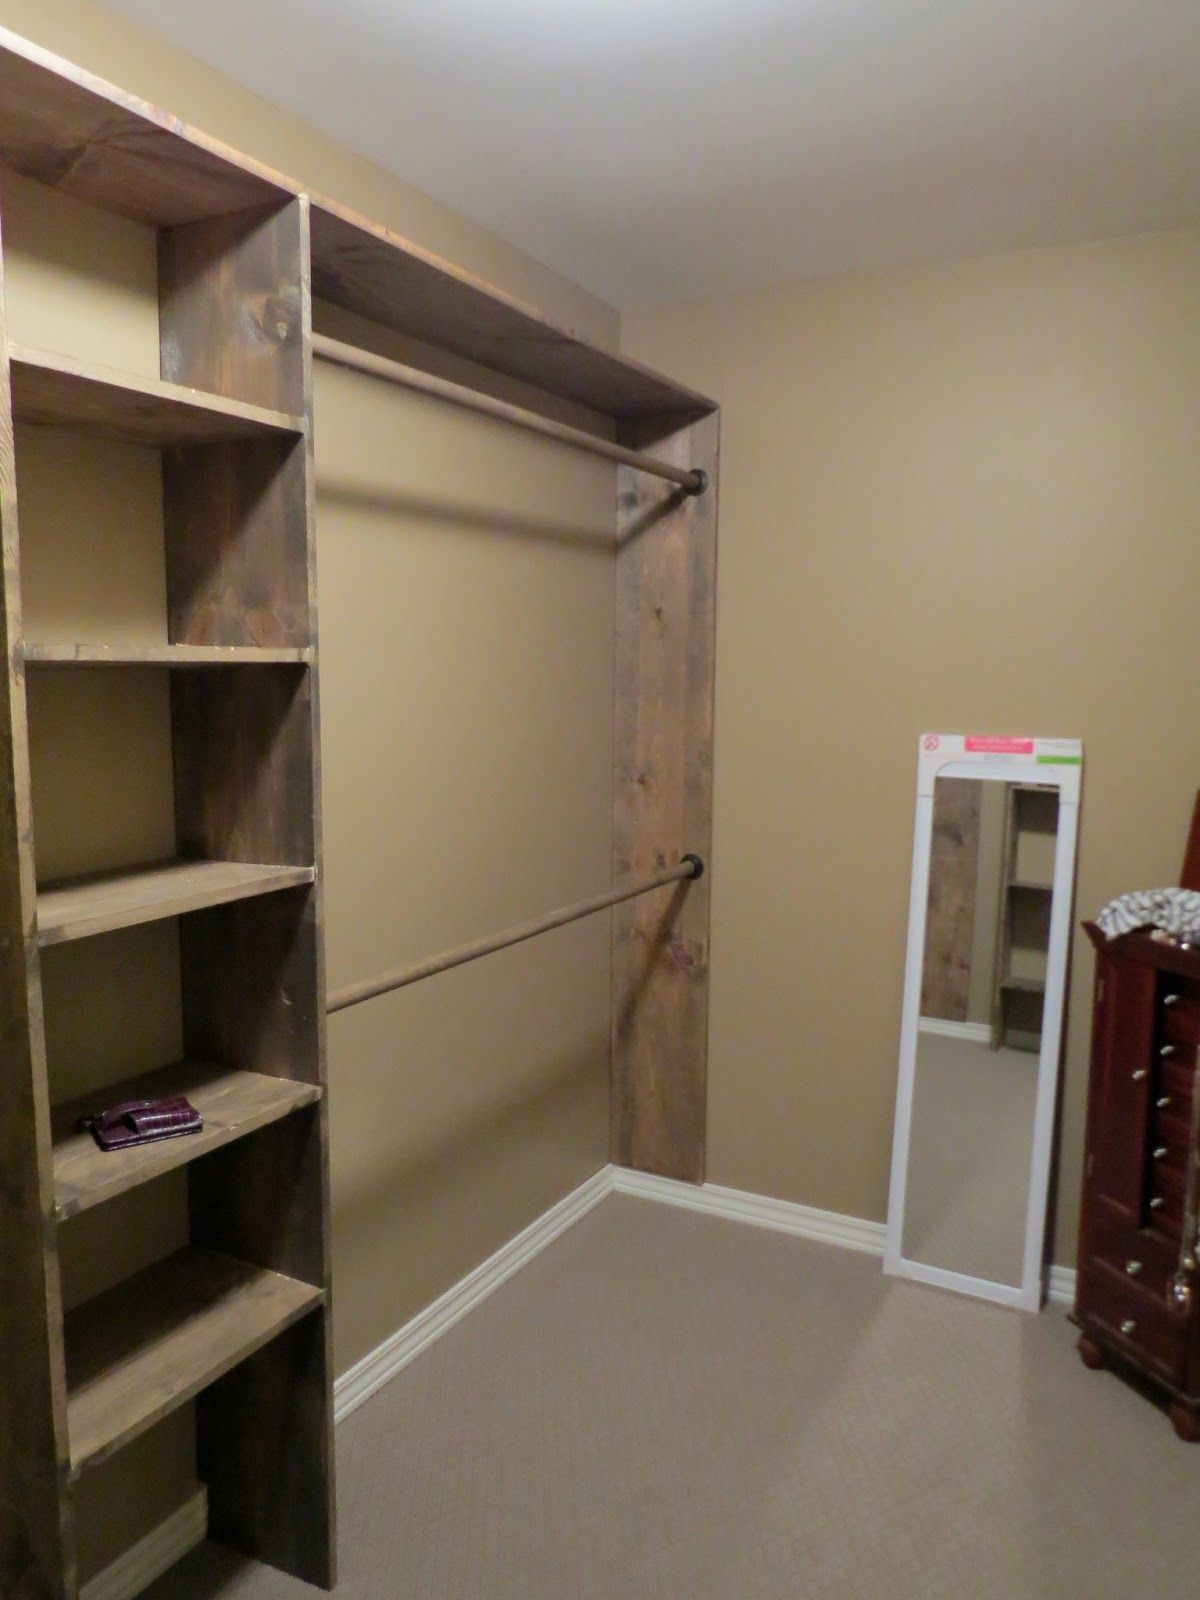 DIY Walk In Closet Organizer
 Let s Just Build a House Walk in closets No more living